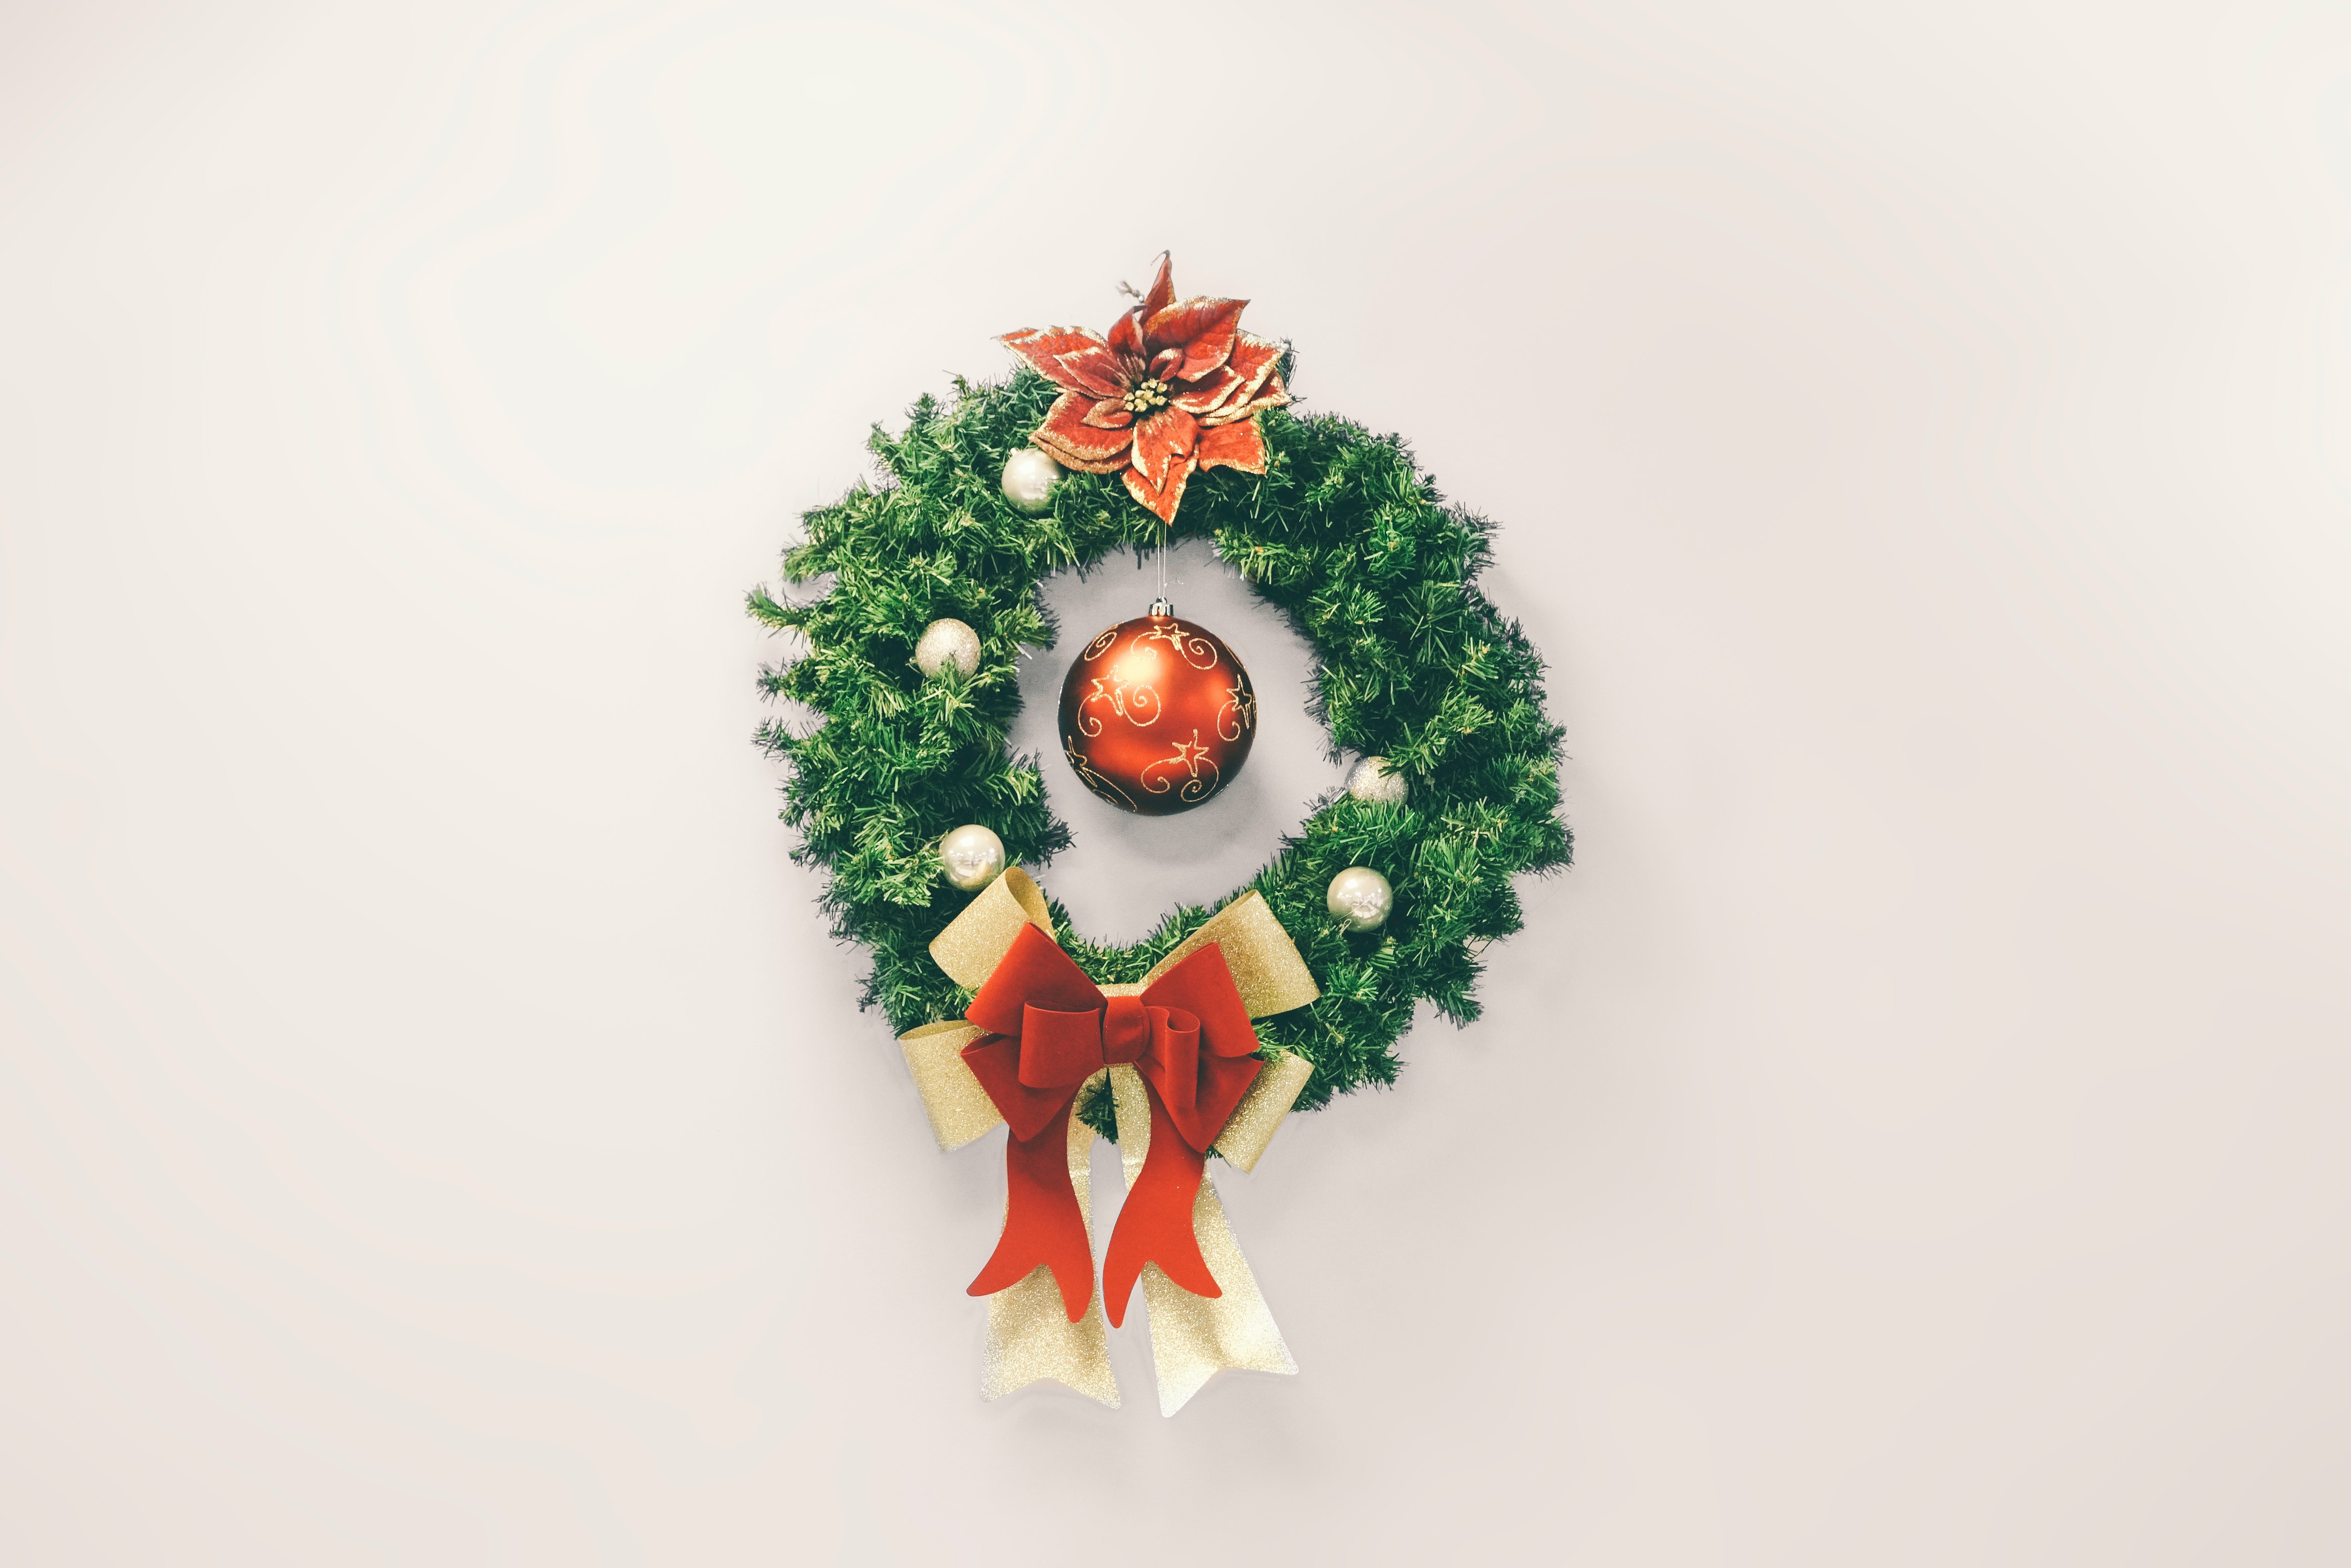 This lovely wreath adorns an otherwise plain wall in the Salvation Army building in Central Harlem during the holiday season.